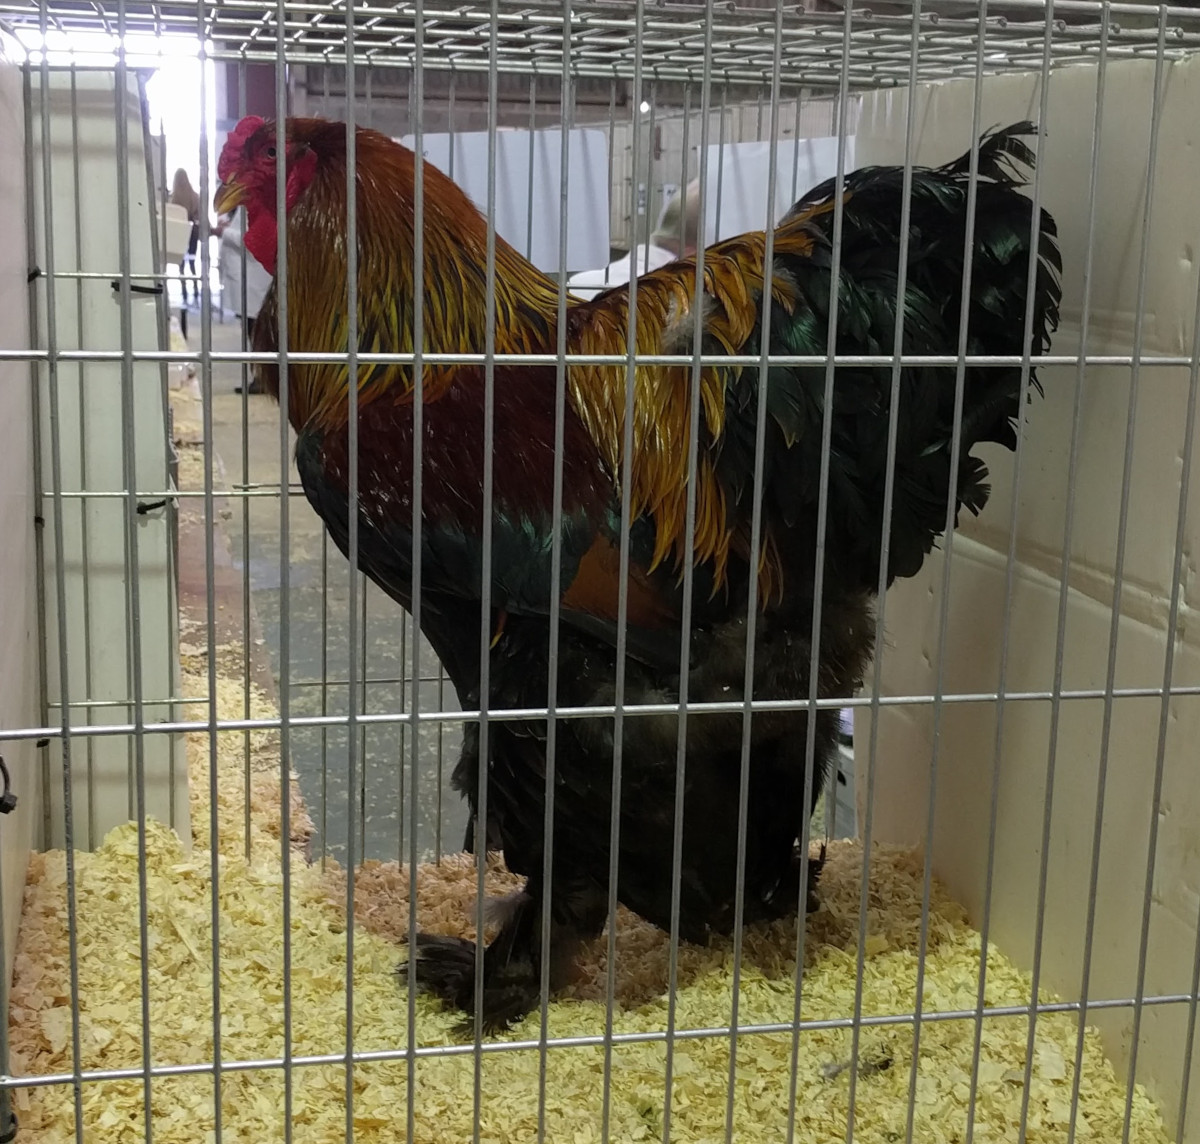 A Brahma chicken at a poultry show, showing just how big they are.